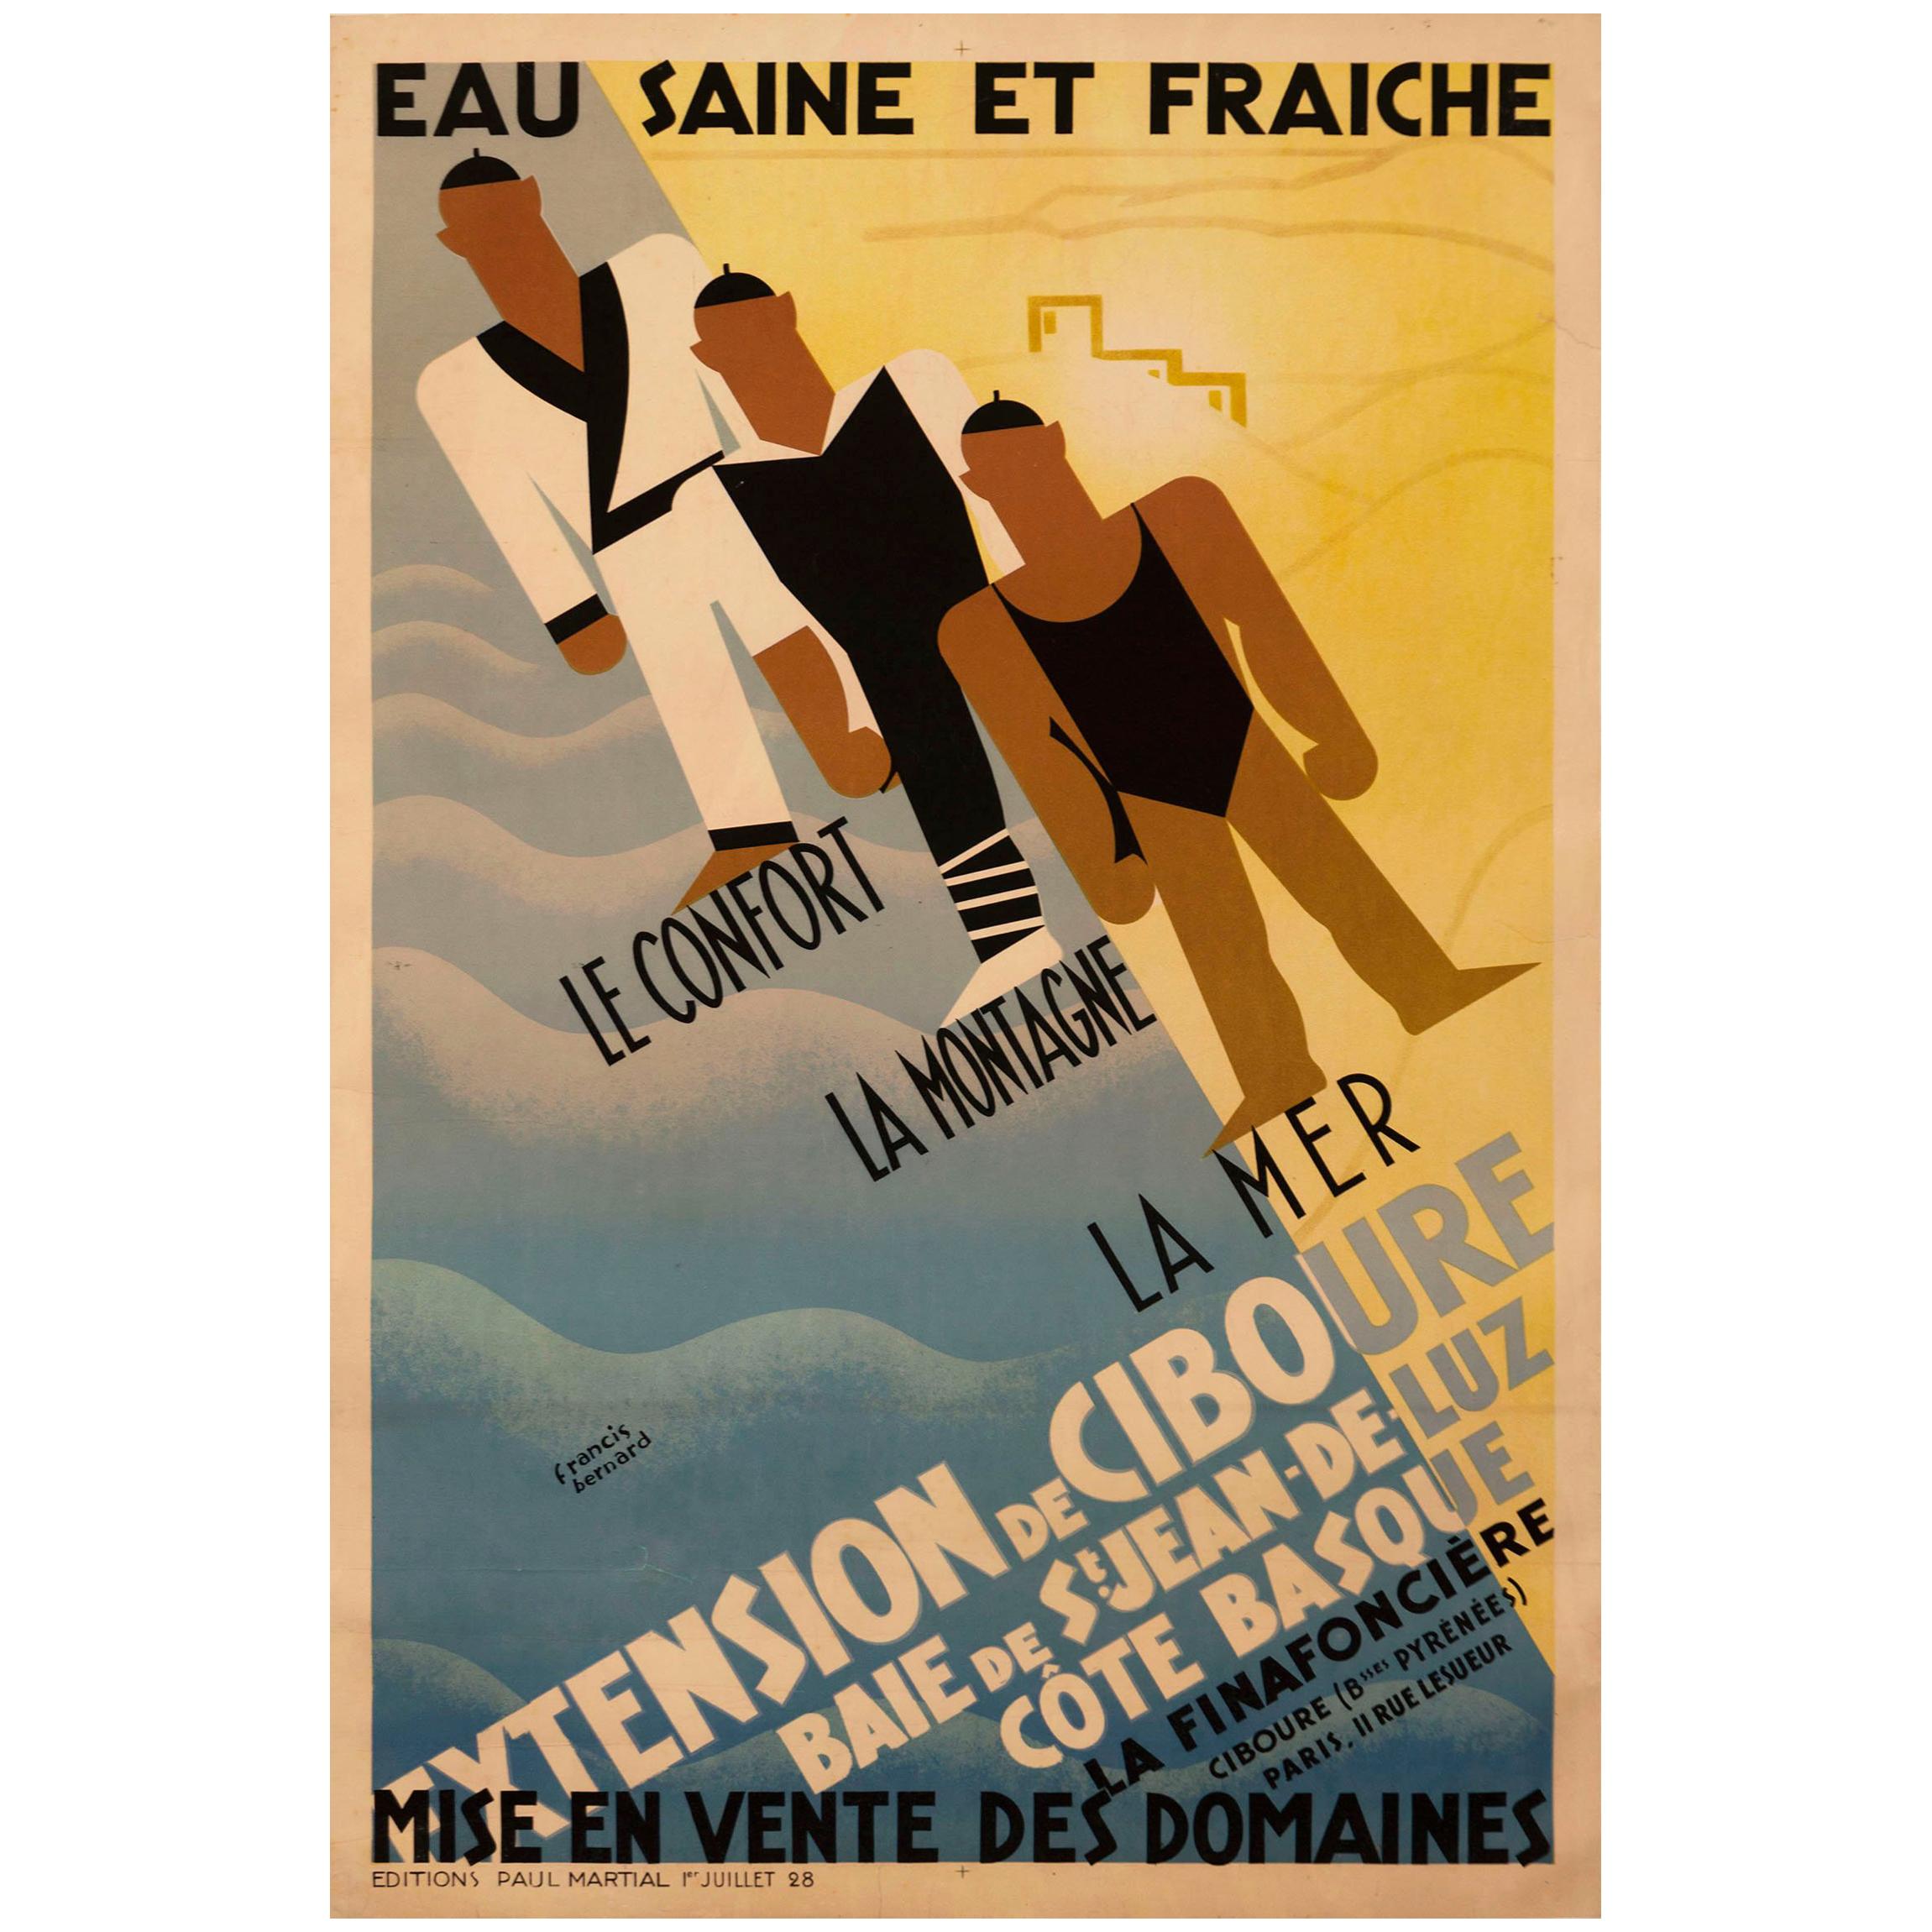 Original French Art Deco Poster for Ciboure on the Cote Basque by Bernard For Sale